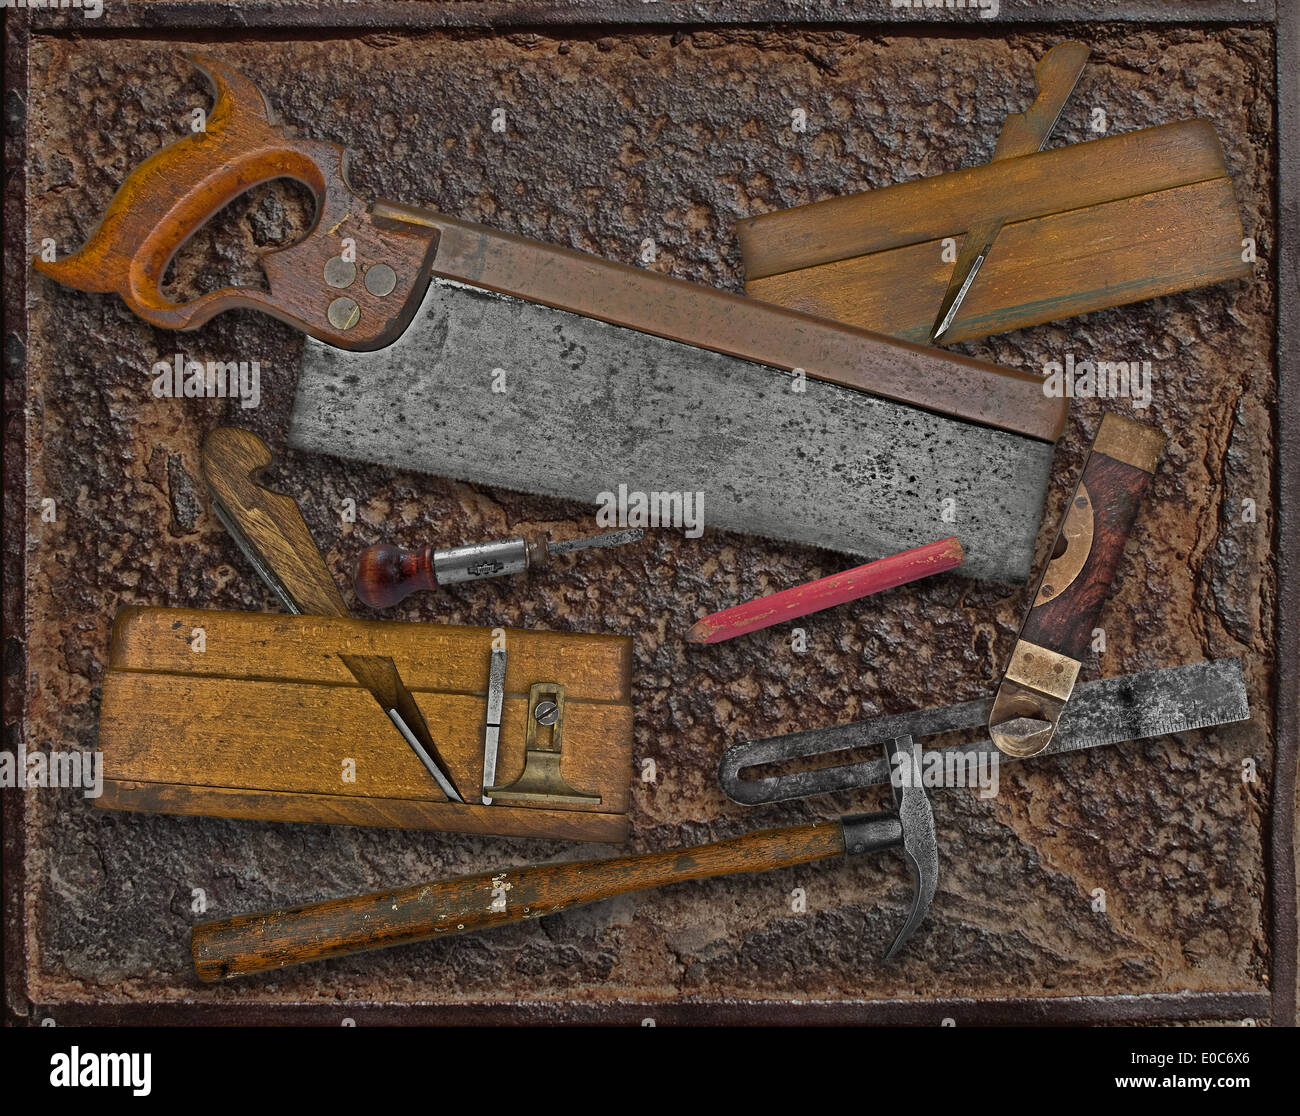 vintage woodworking tools over rusty industrial metal plate Stock Photo